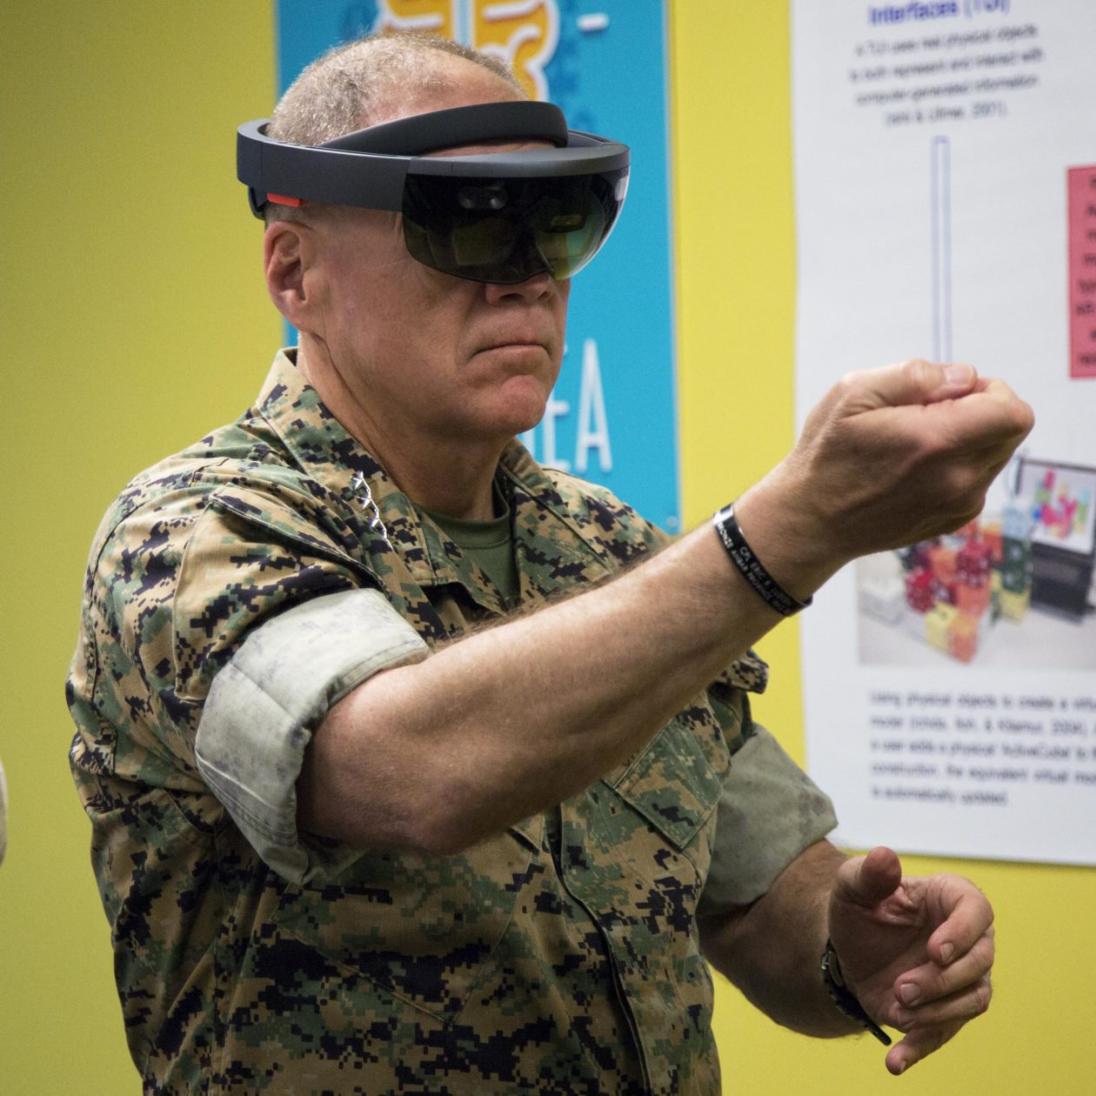 How Can AI-Augmented Reality Be Used to Improve Soldier Situational Awareness?